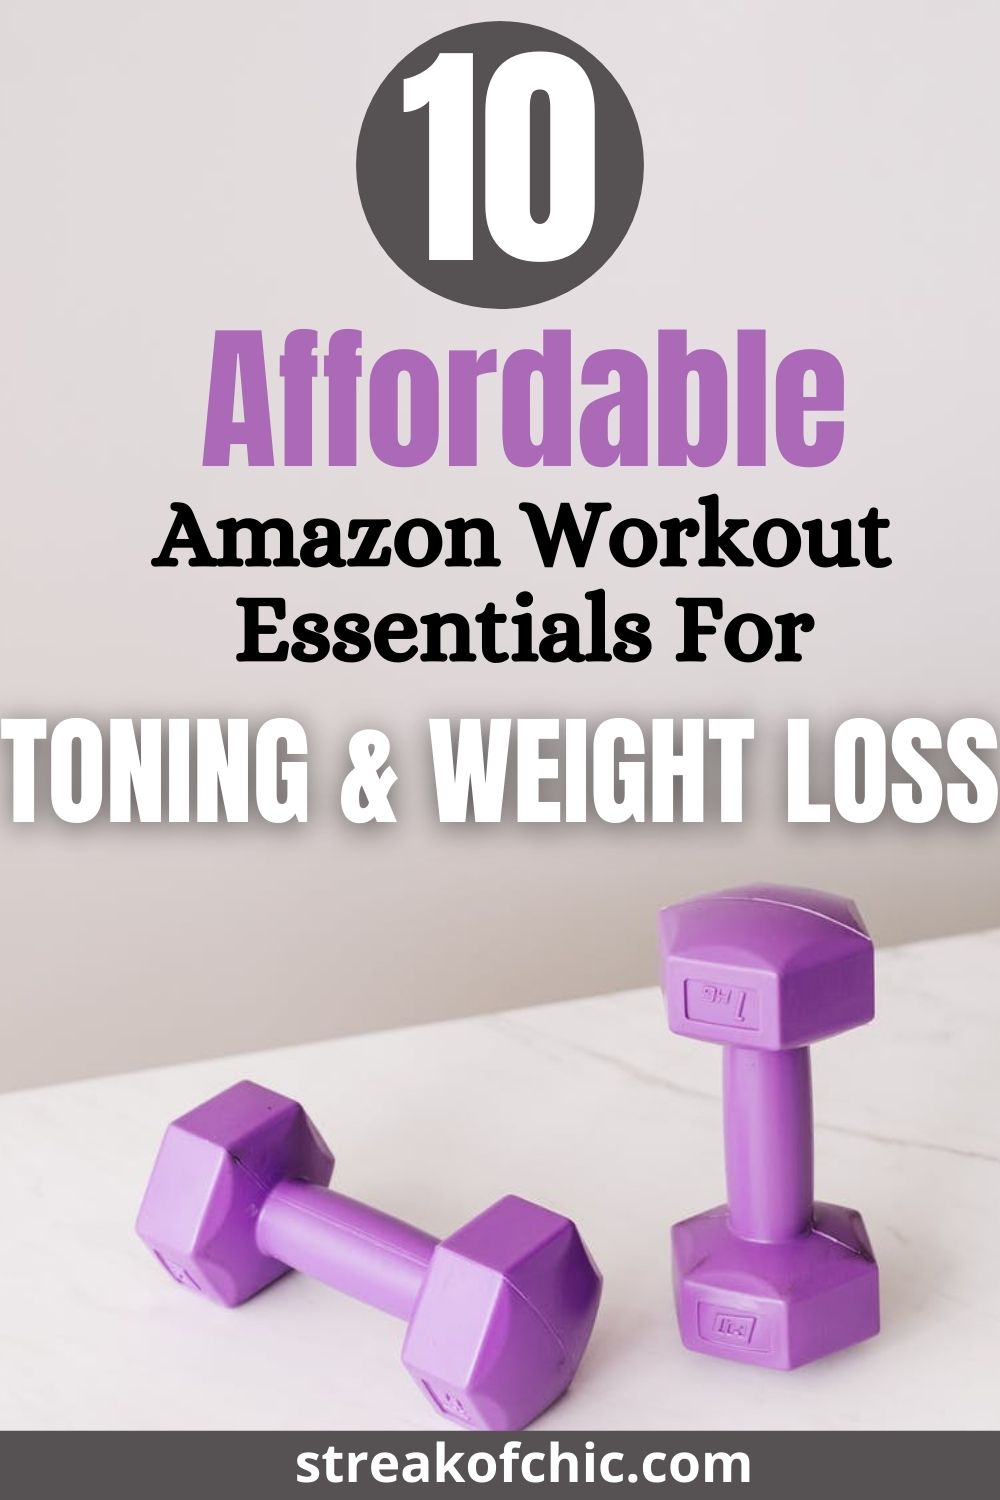 10 Affordable Amazon Workout Essentials That’ll Get You Fit In No Time